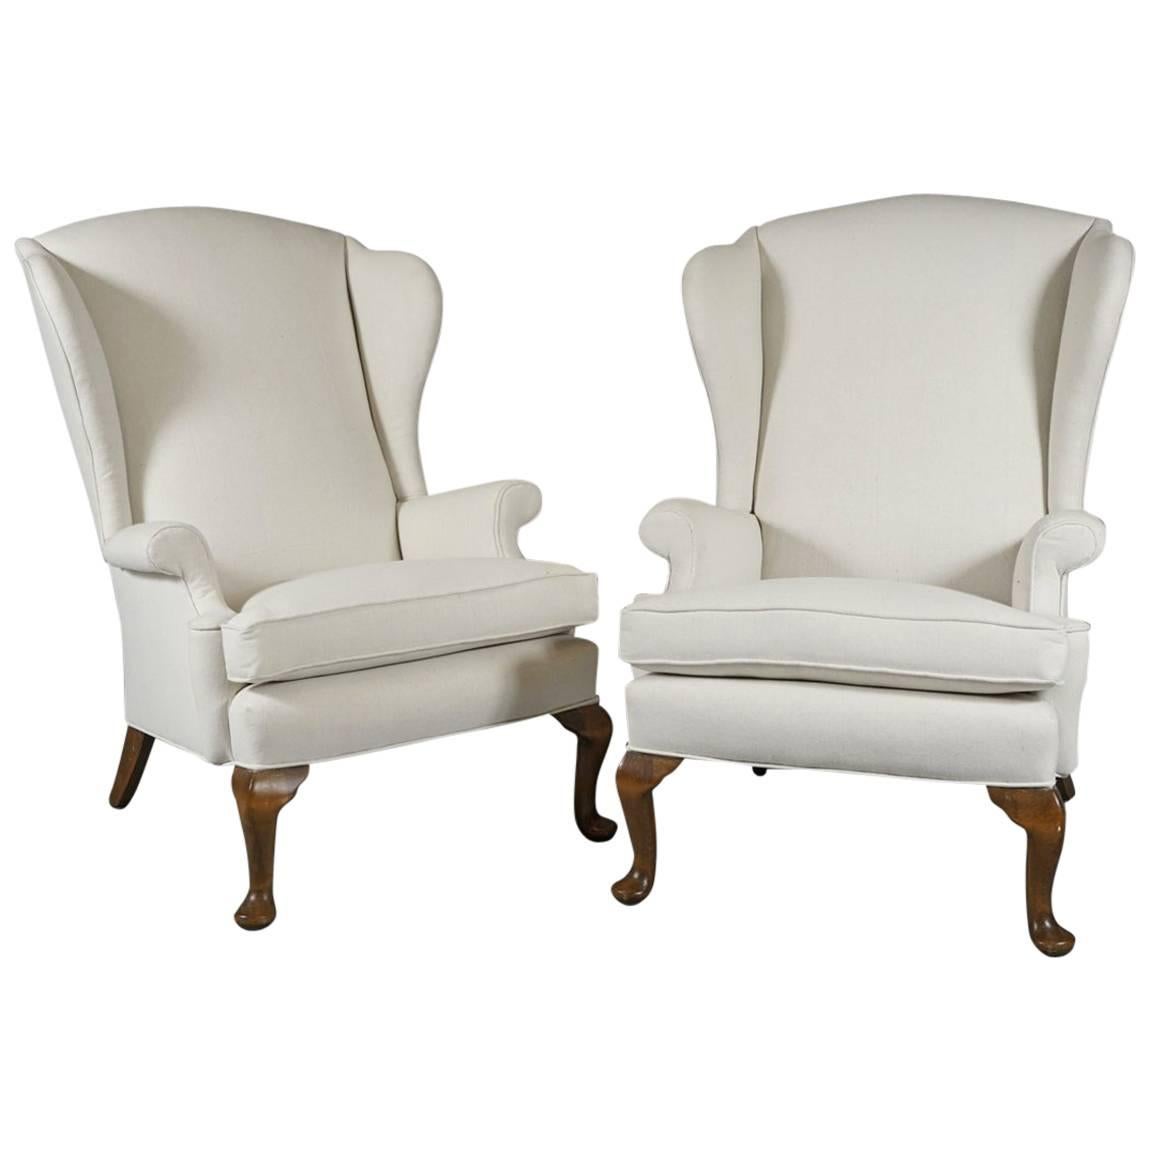 Pair of Early 20th Century Queen Anne Style Wingchairs